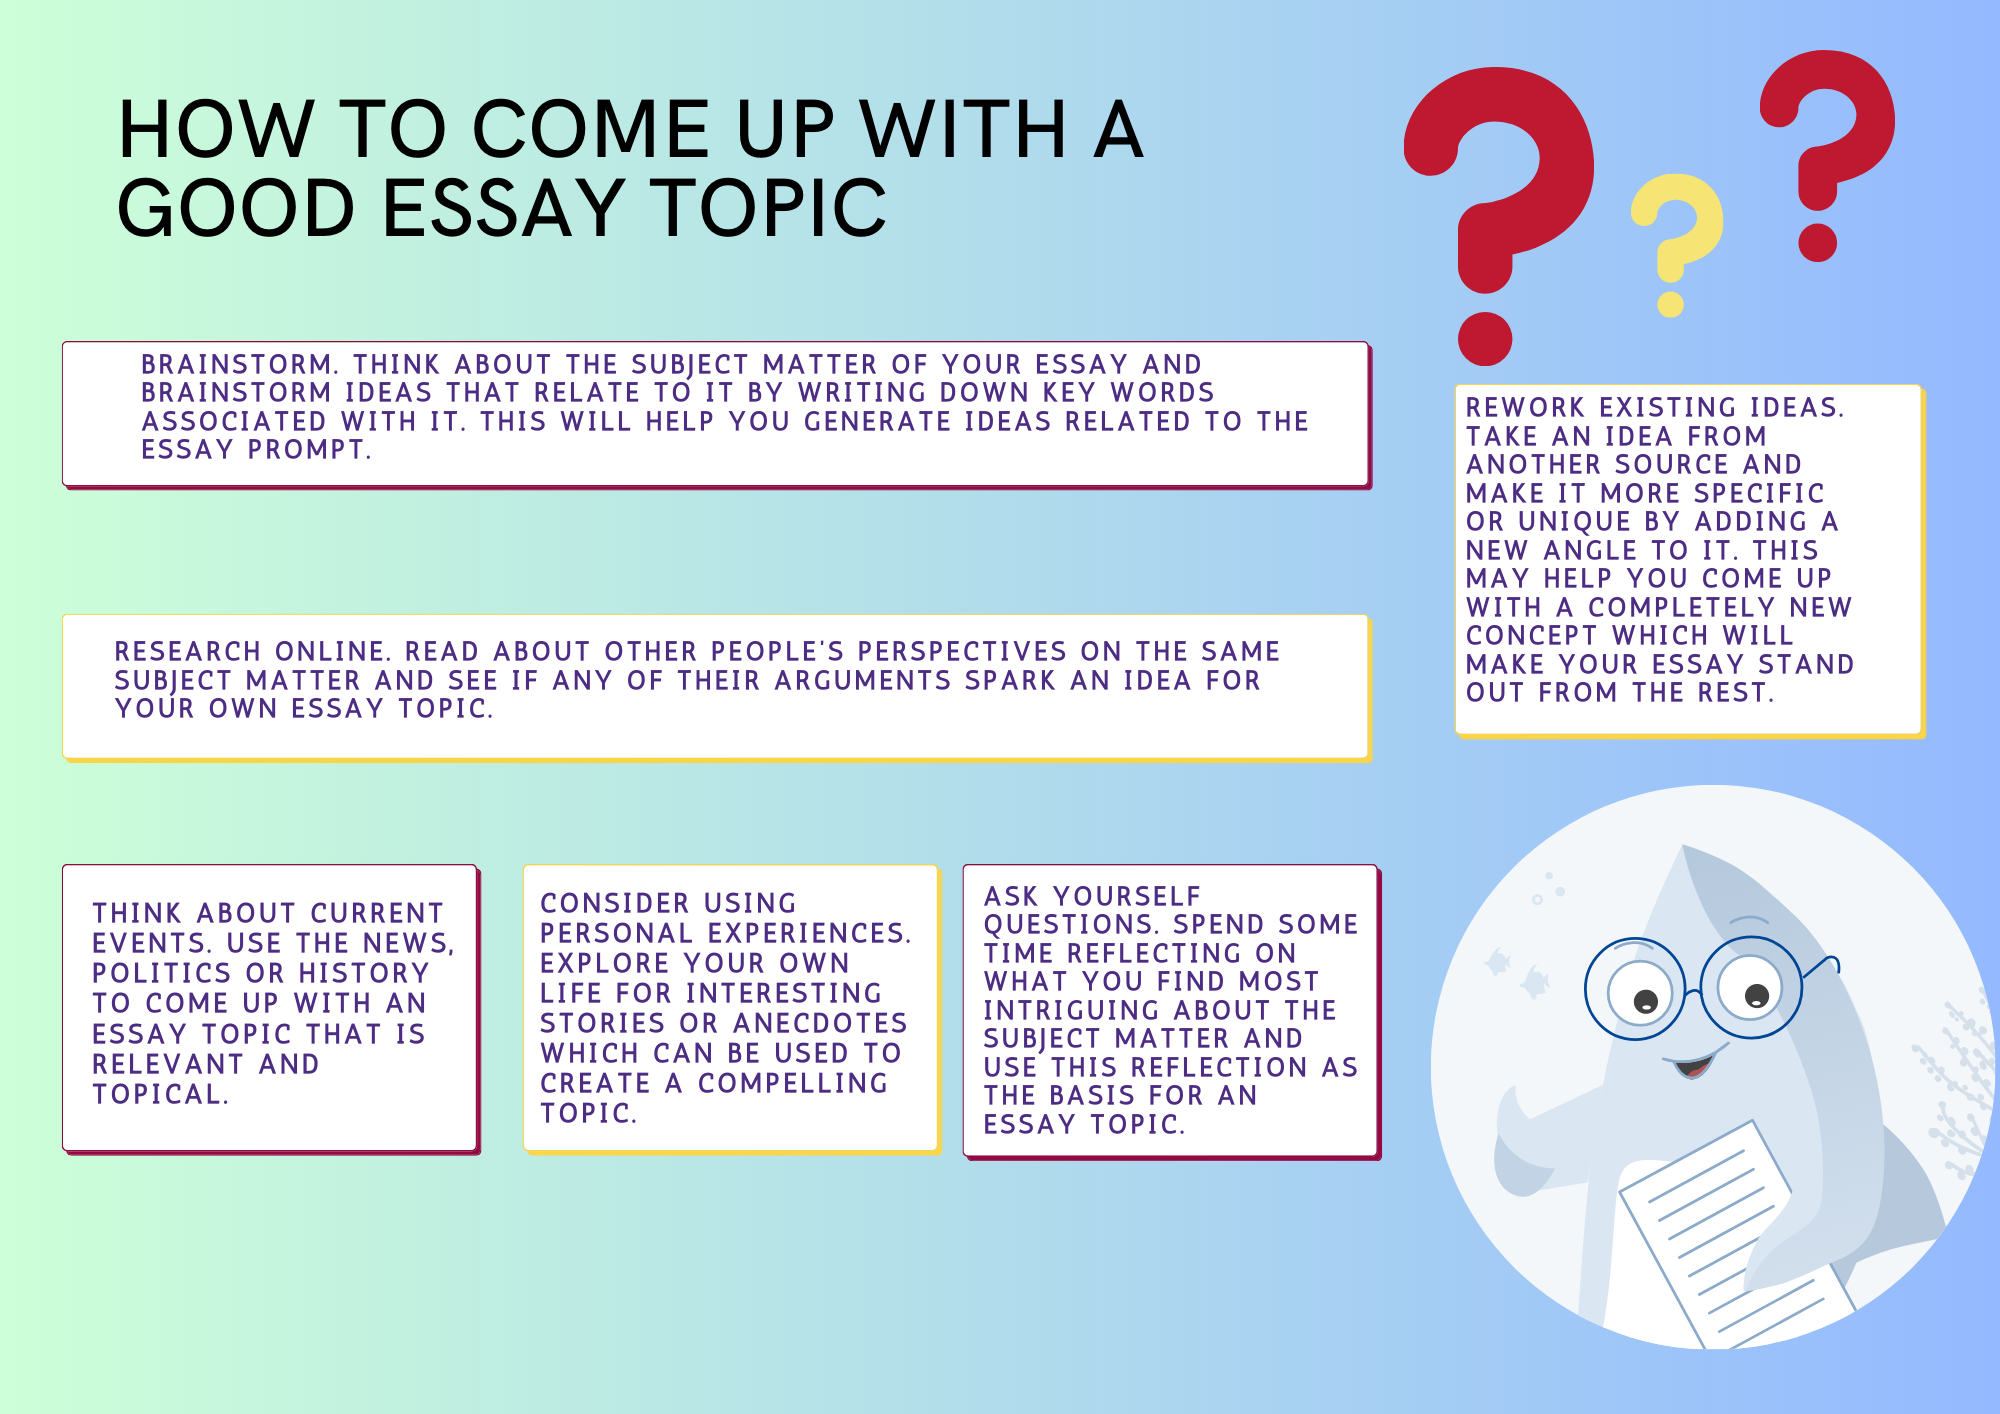 how to come up with a good essay topic